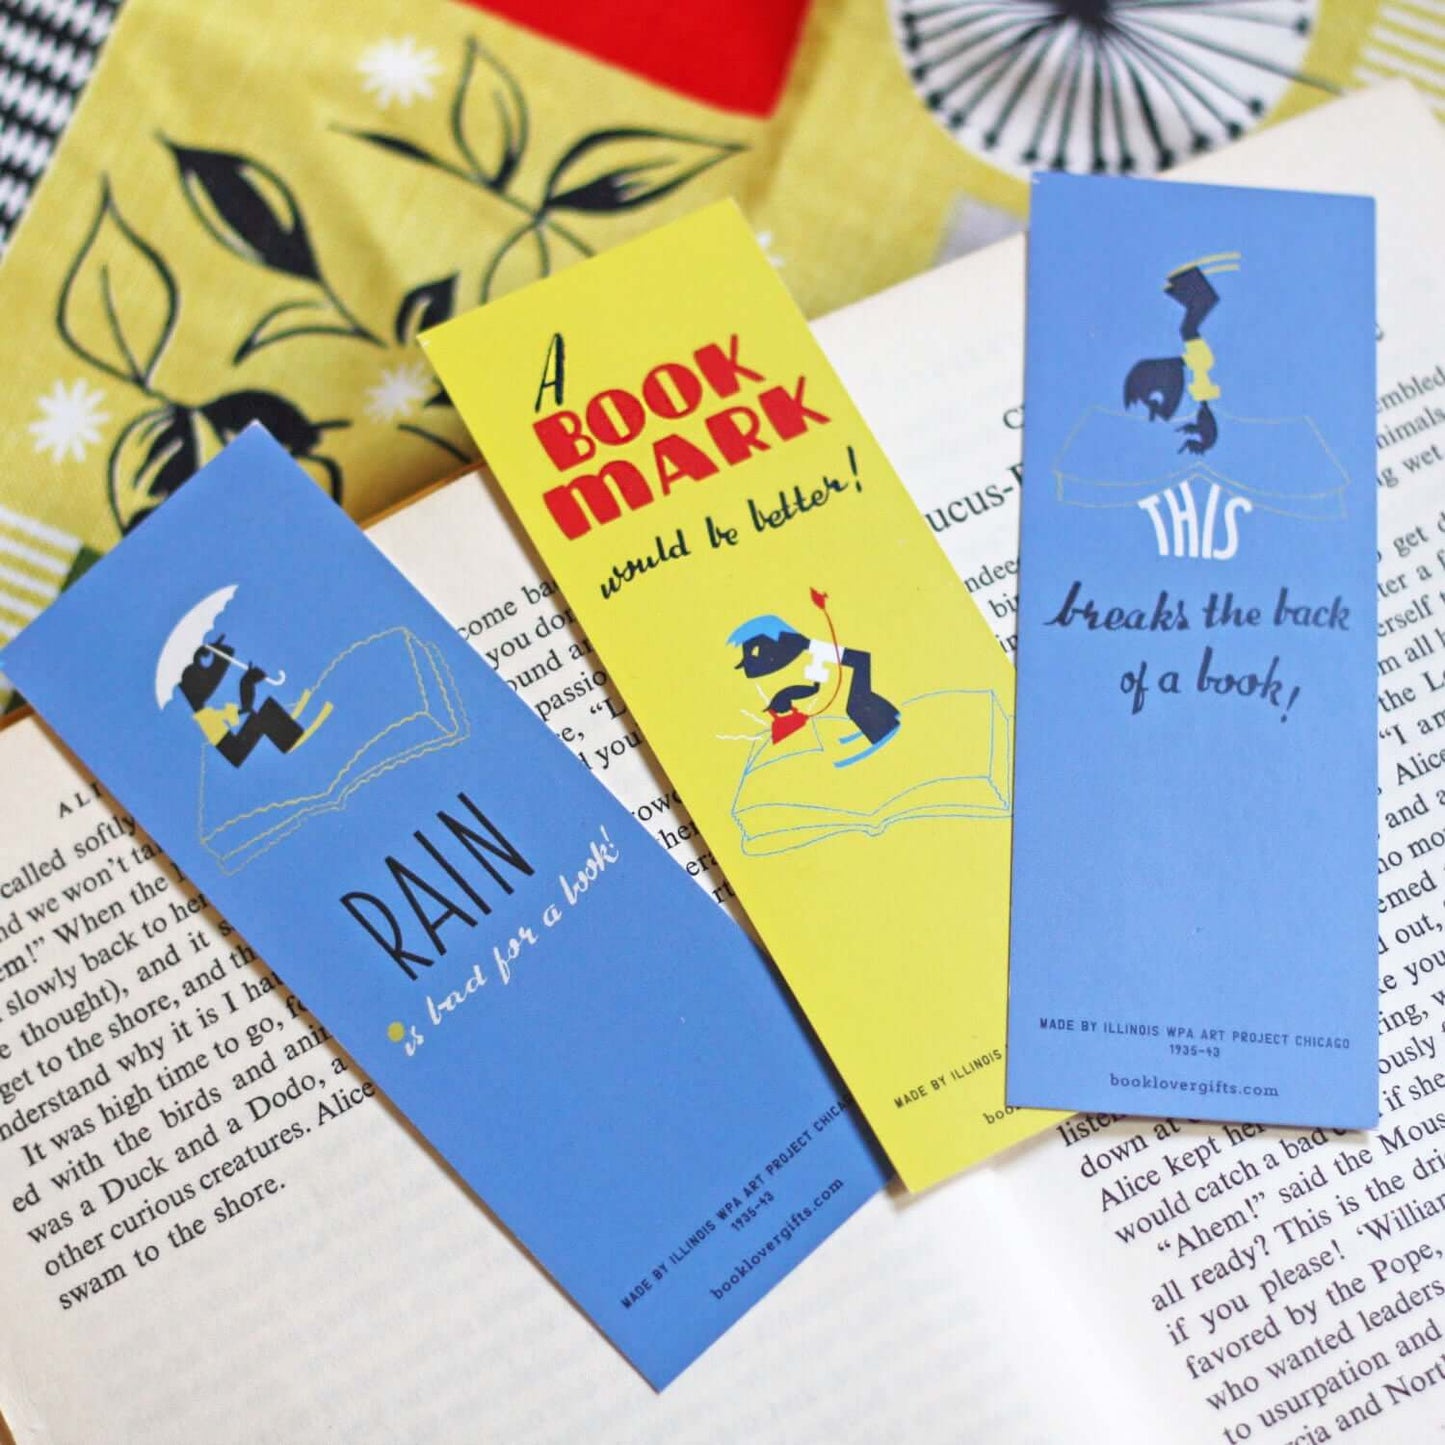 Bookmark Set of 3 - Vintage - A Bookmark Would be Better